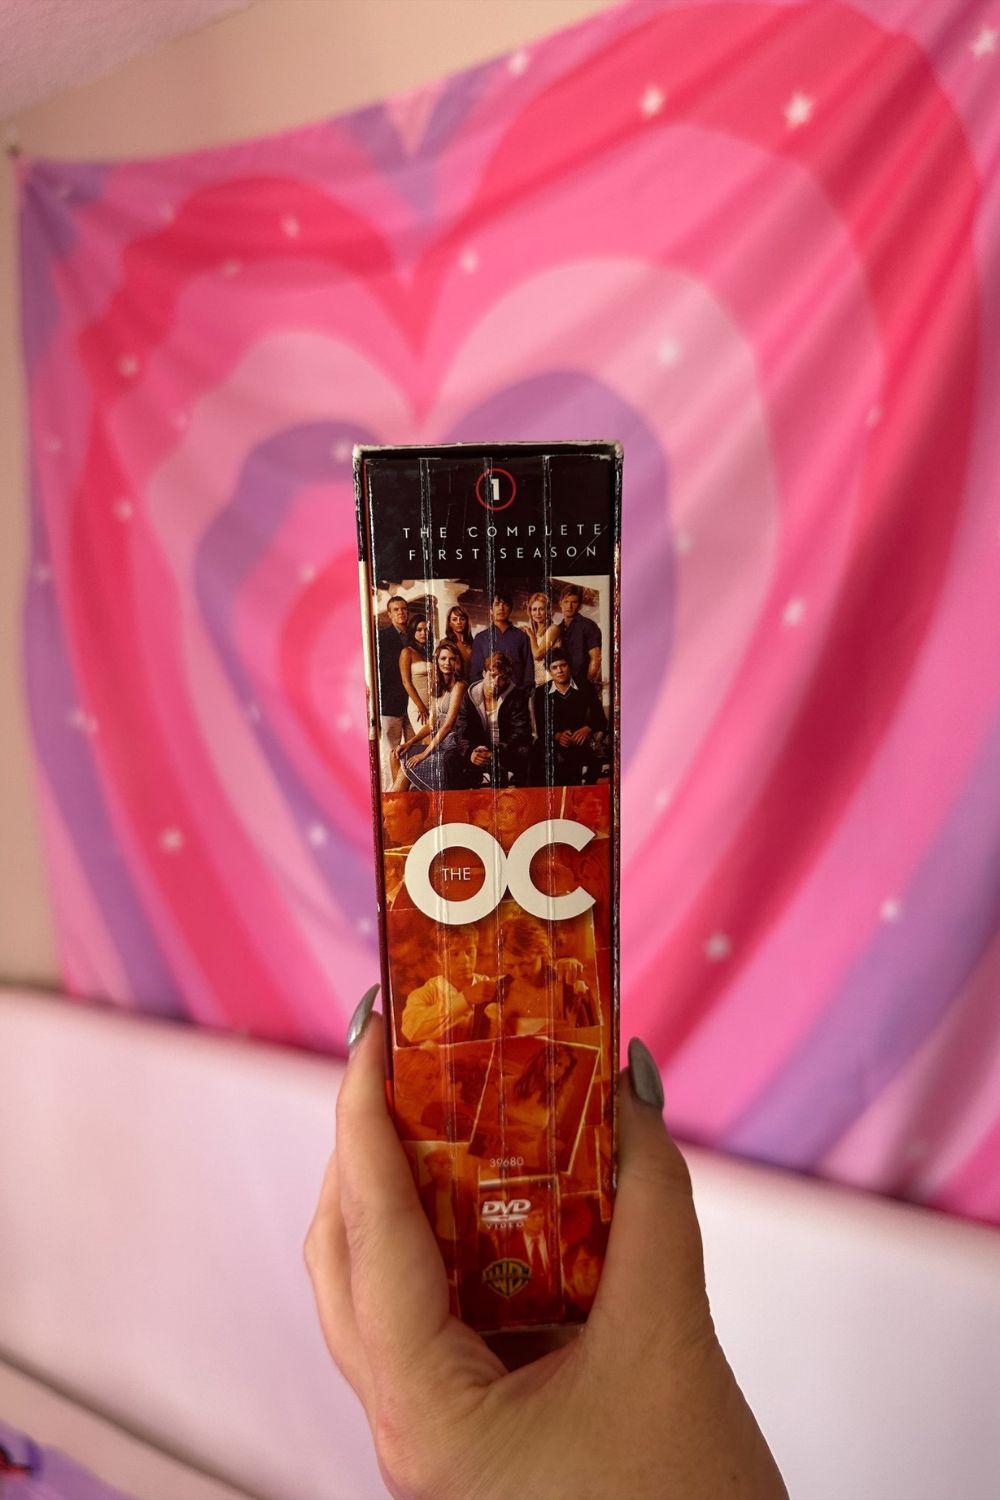 THE OC - THE COMPLETE FIRST SEASON DVD COLLECTION*